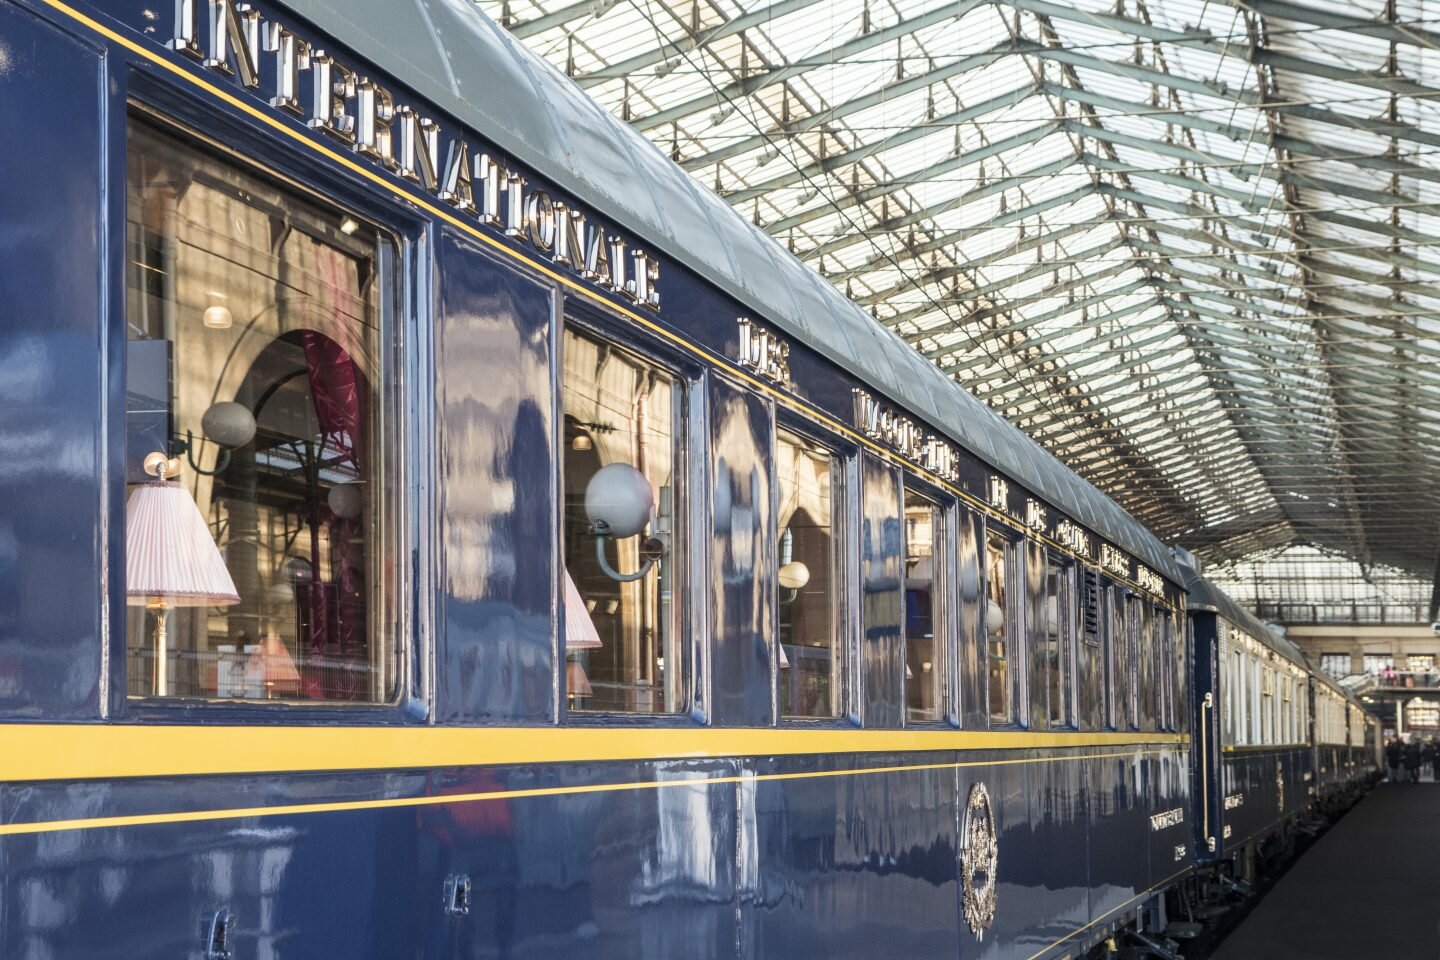 Travel (Back In Time) On The Orient Express